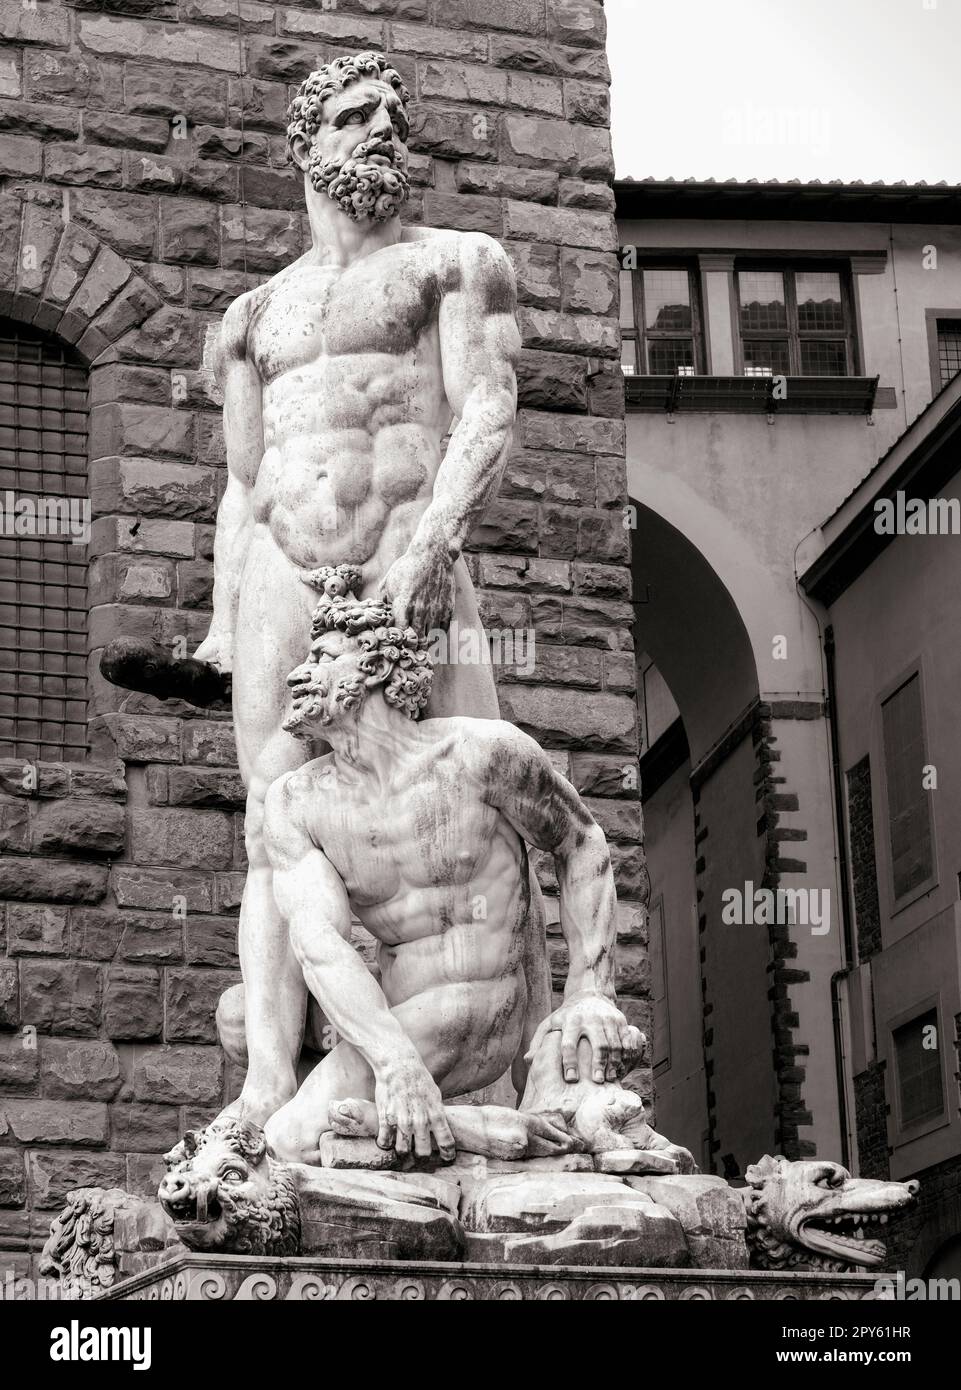 Marble statue of Hercules and Cacus to the right of the entrance of the Palazzo Vecchio in the Piazza della Signoria, Florence, Tuscany, Italy.  The s Stock Photo